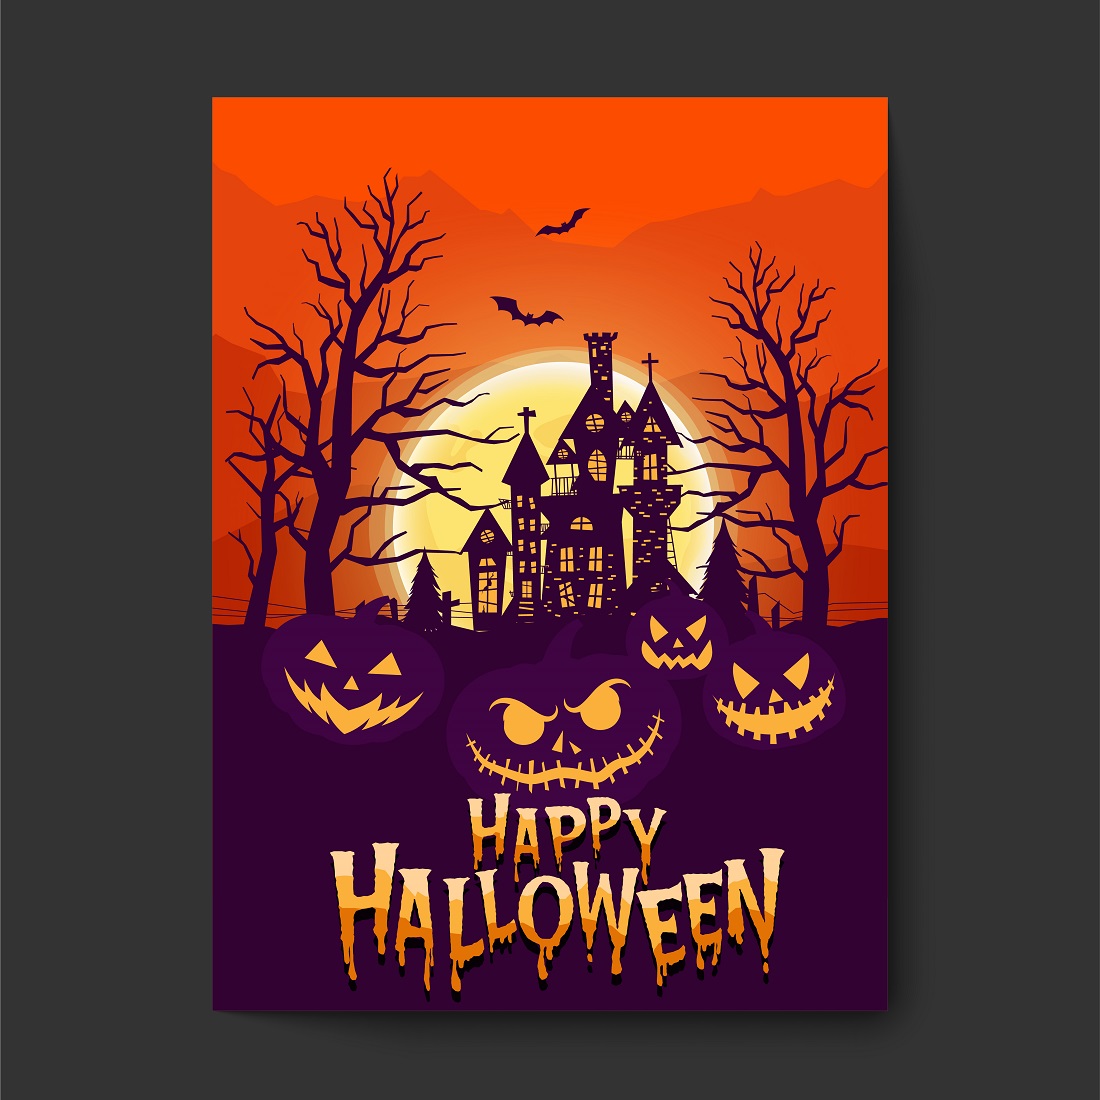 Happy Halloween party invitation background with night clouds scary castle preview image.